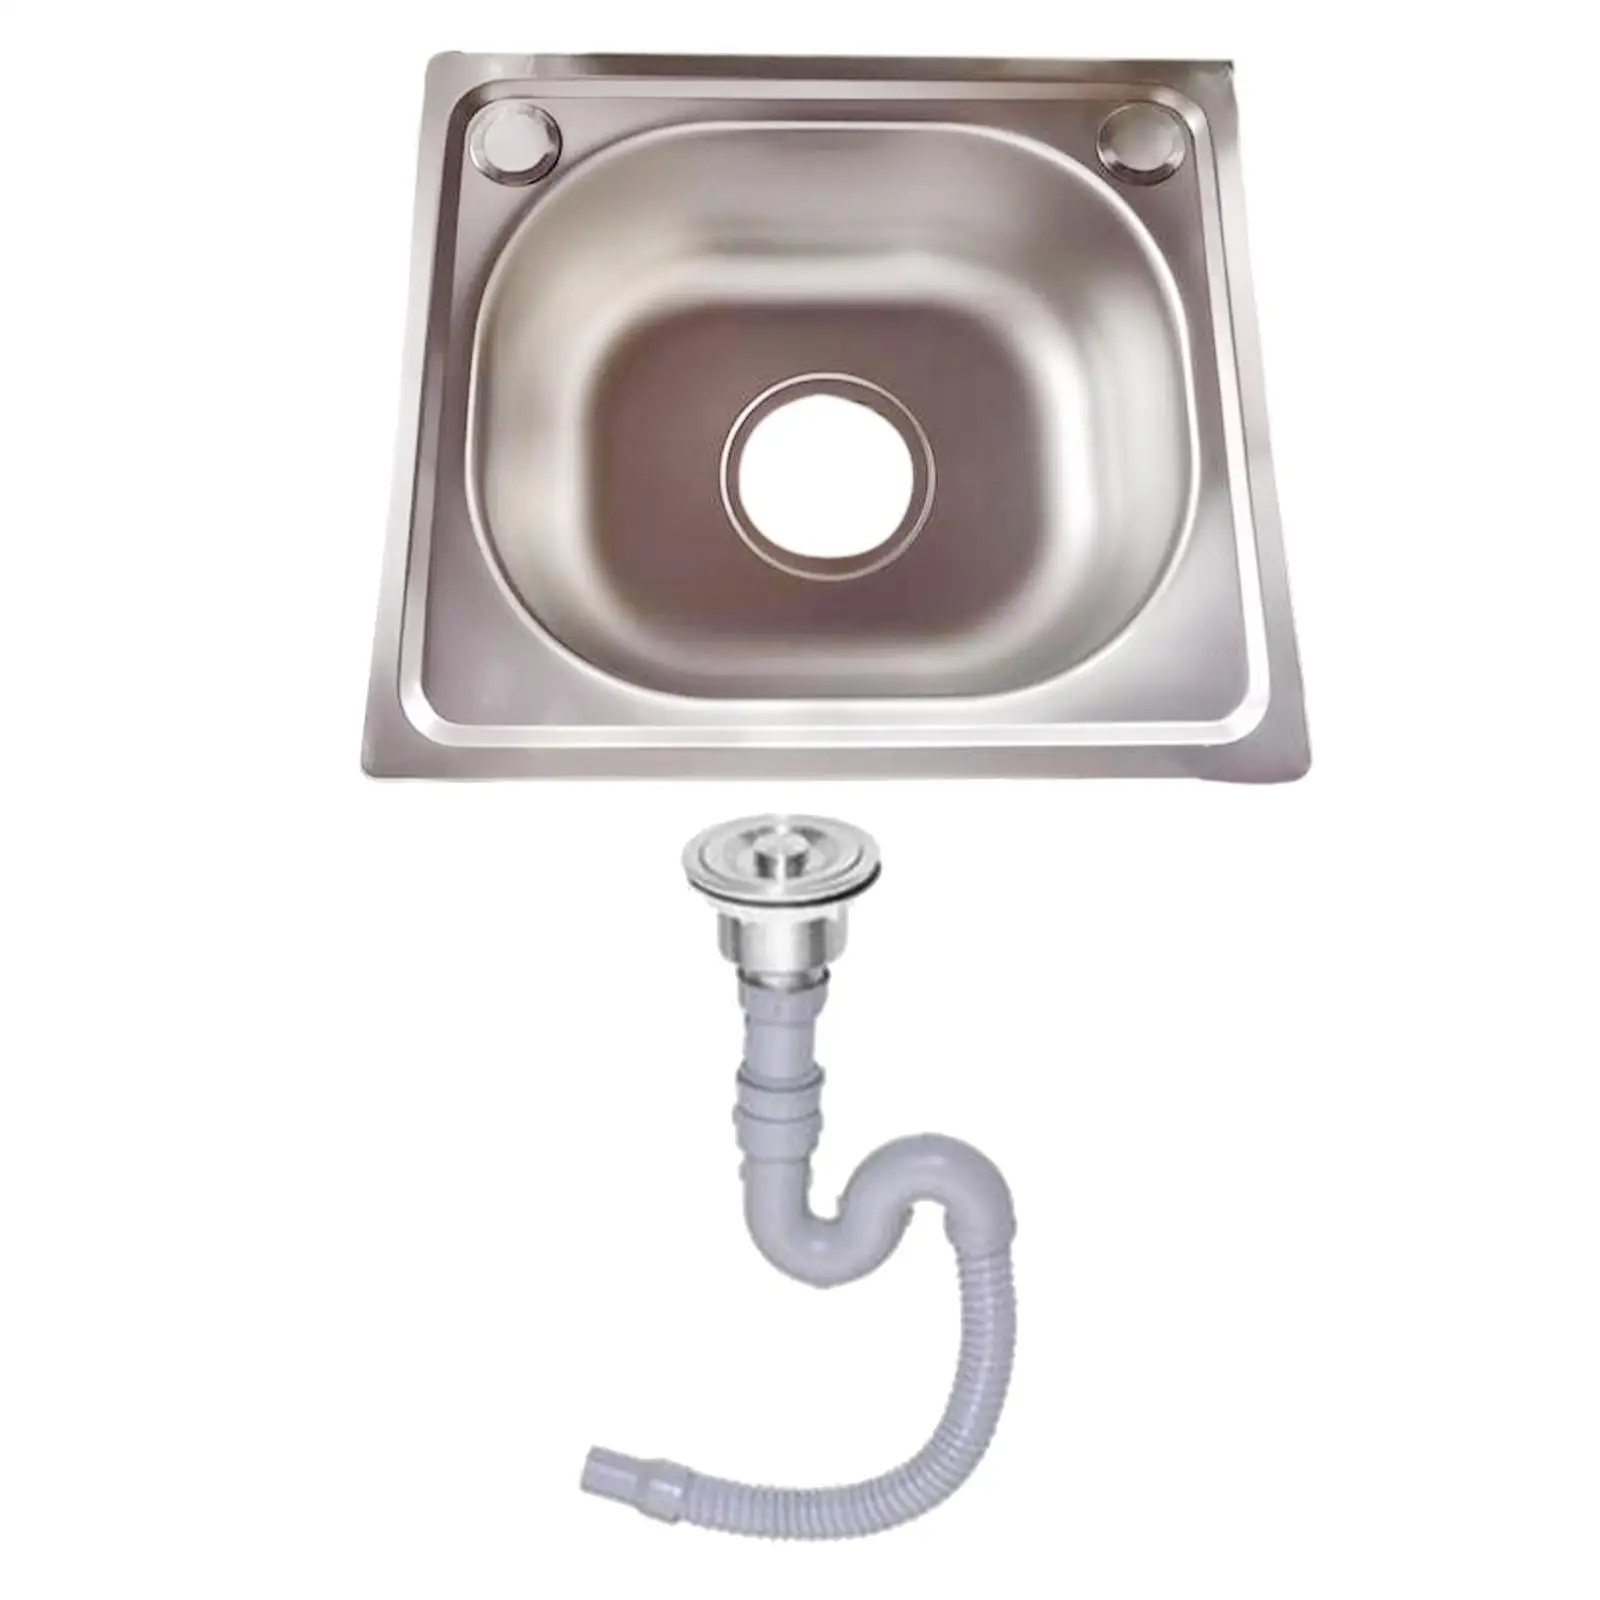 Topmount Stainless Steel Kitchen Sink Quickly Drainage Rectangle 37cmx32cm Heavy